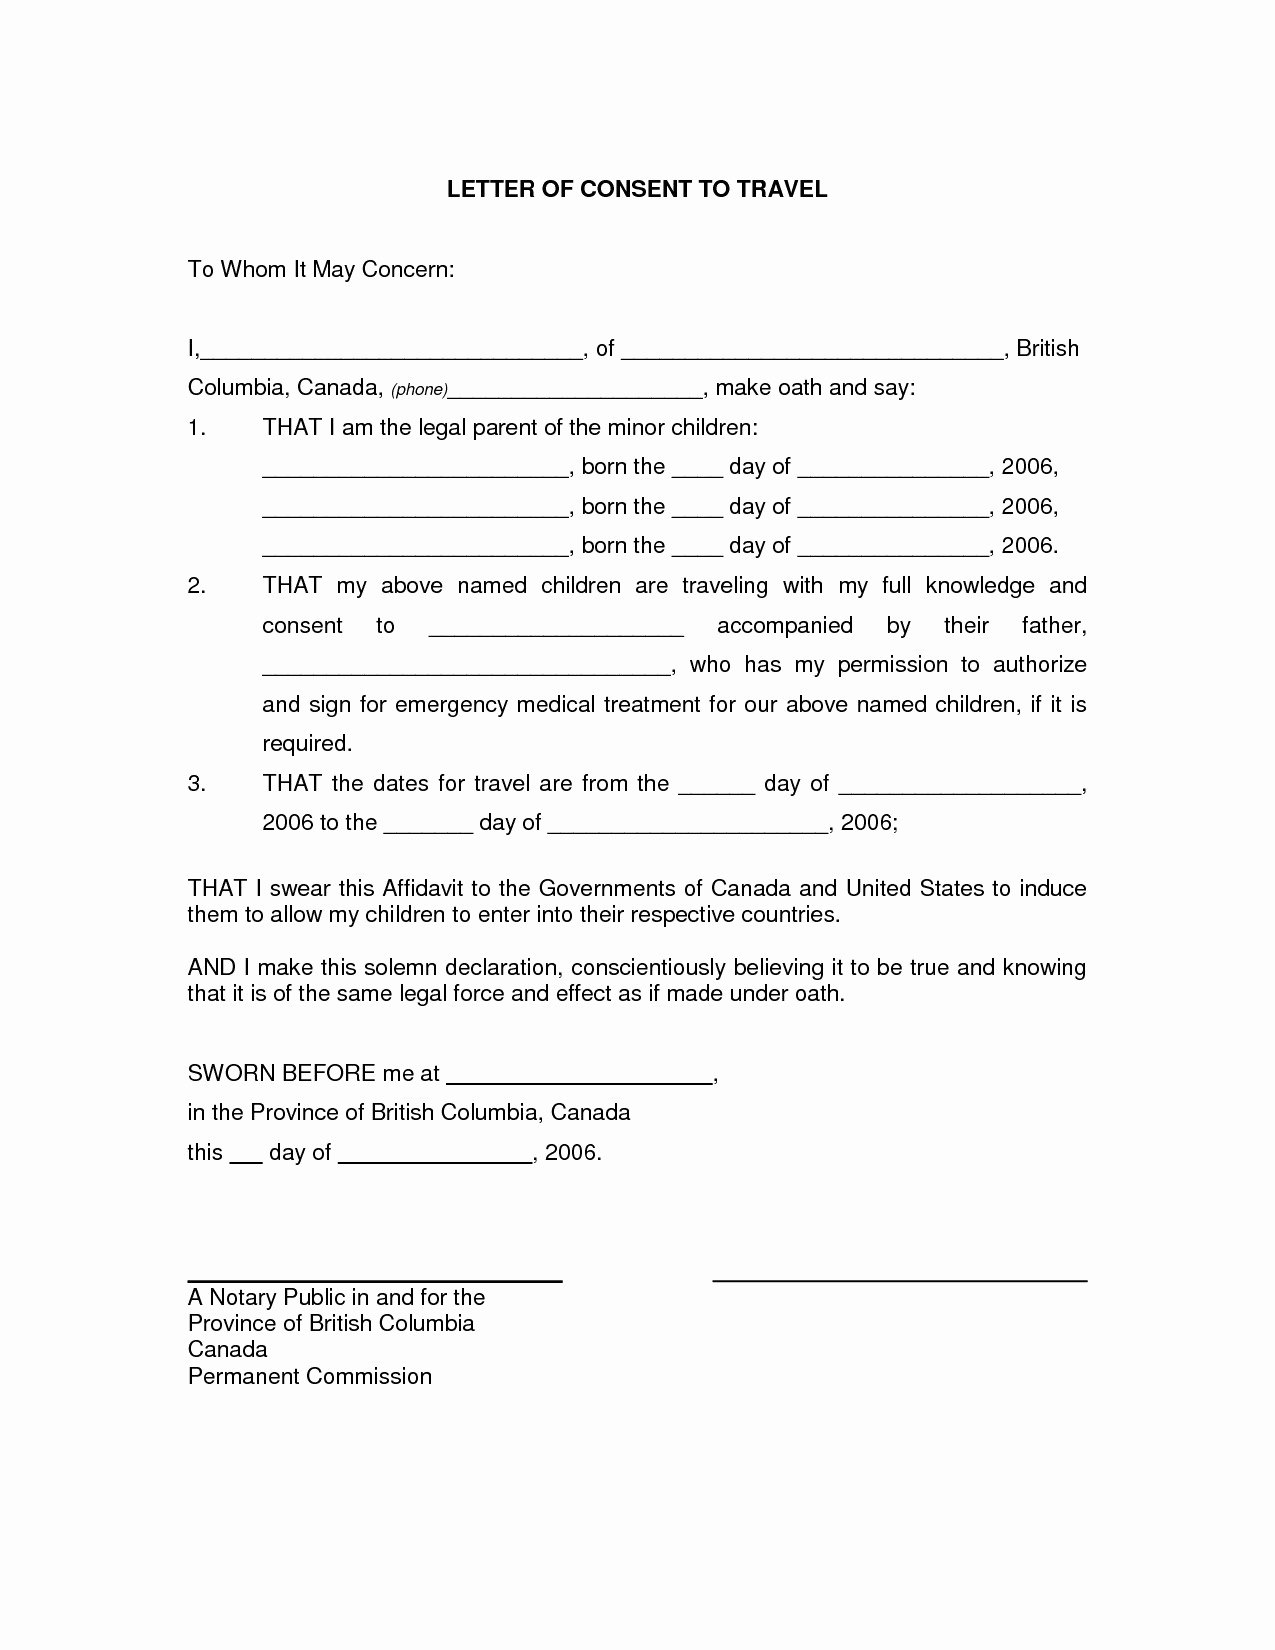 Child Travel Consent form Template Elegant Consent Letter for Children Travelling Abroad